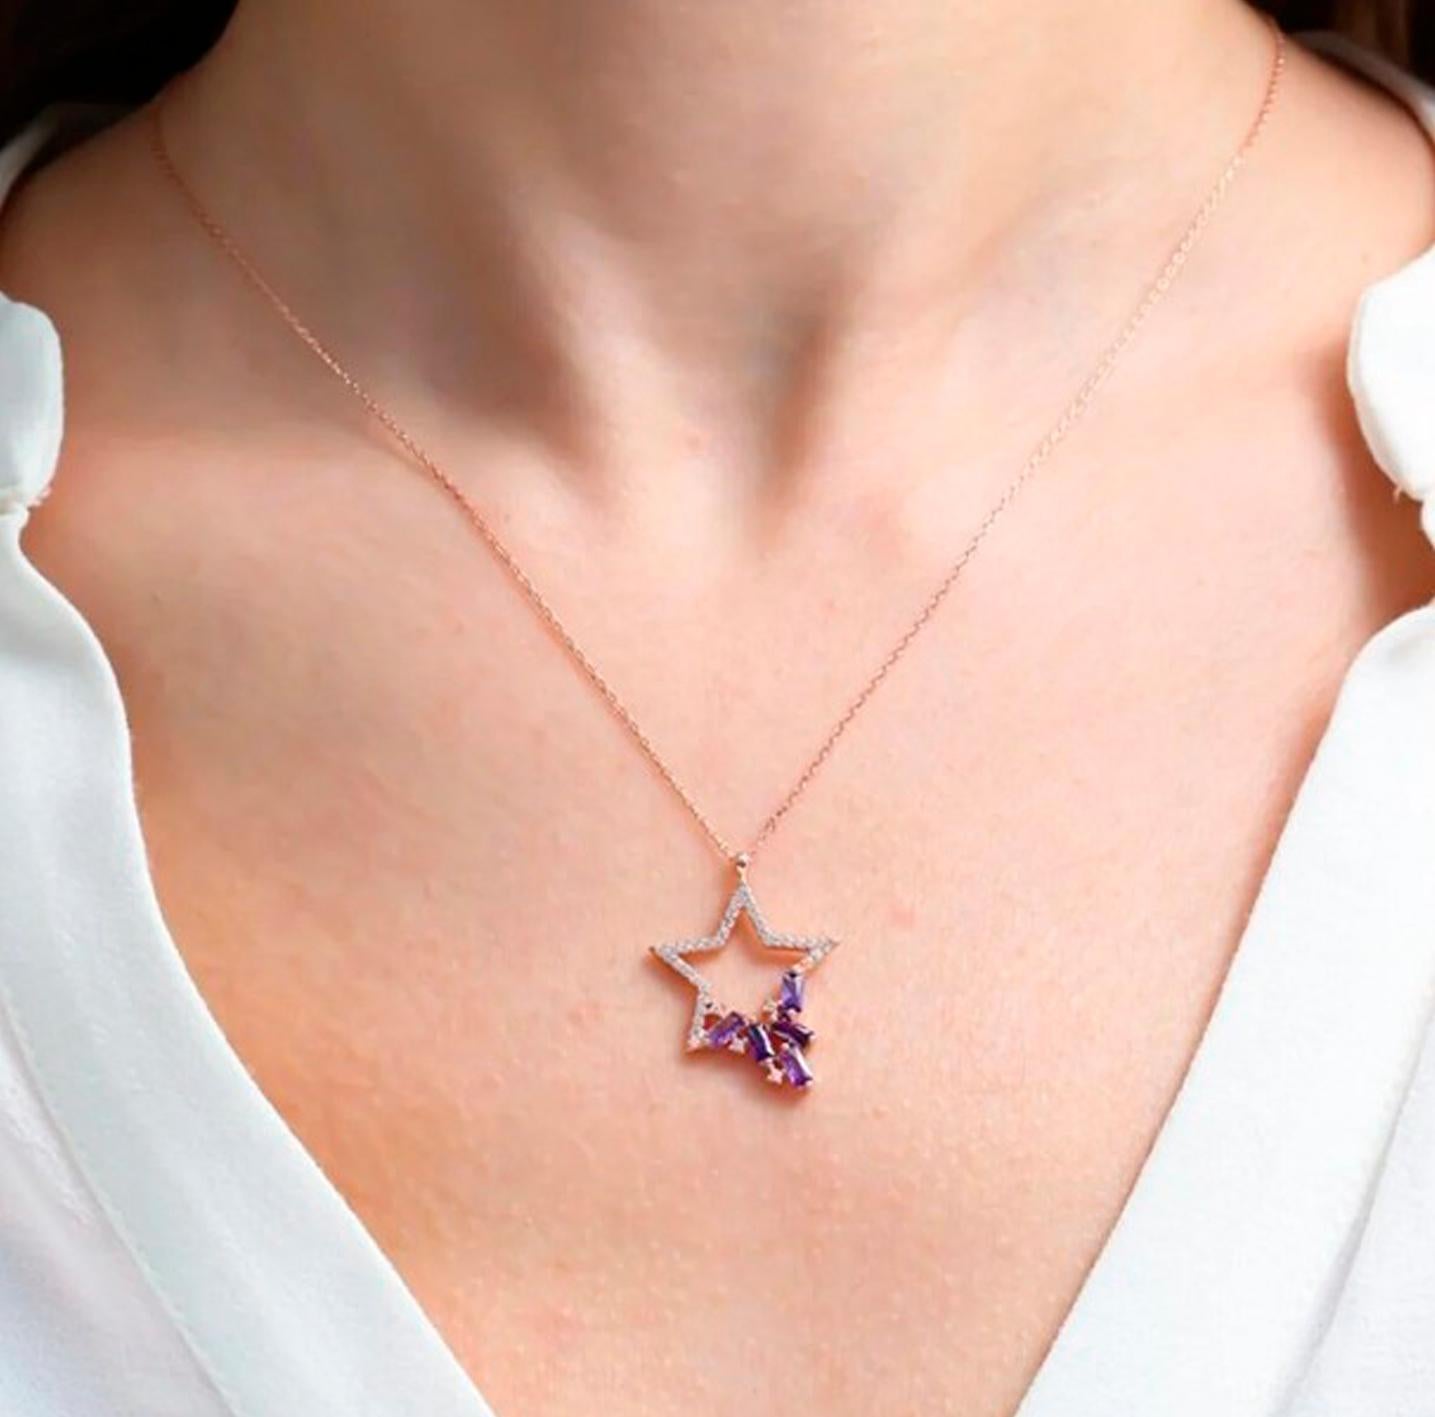 Star Pendant Necklace with Diamonds and Amethysts in 14k Gold For Sale 2